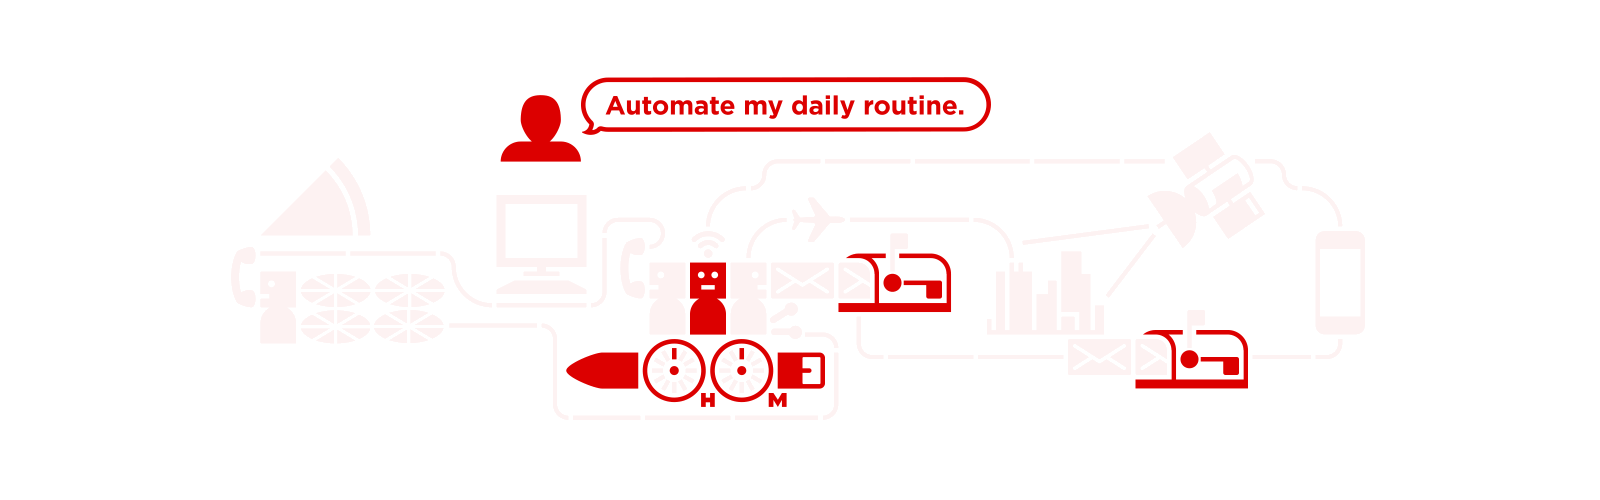 Bot automate routine cropped